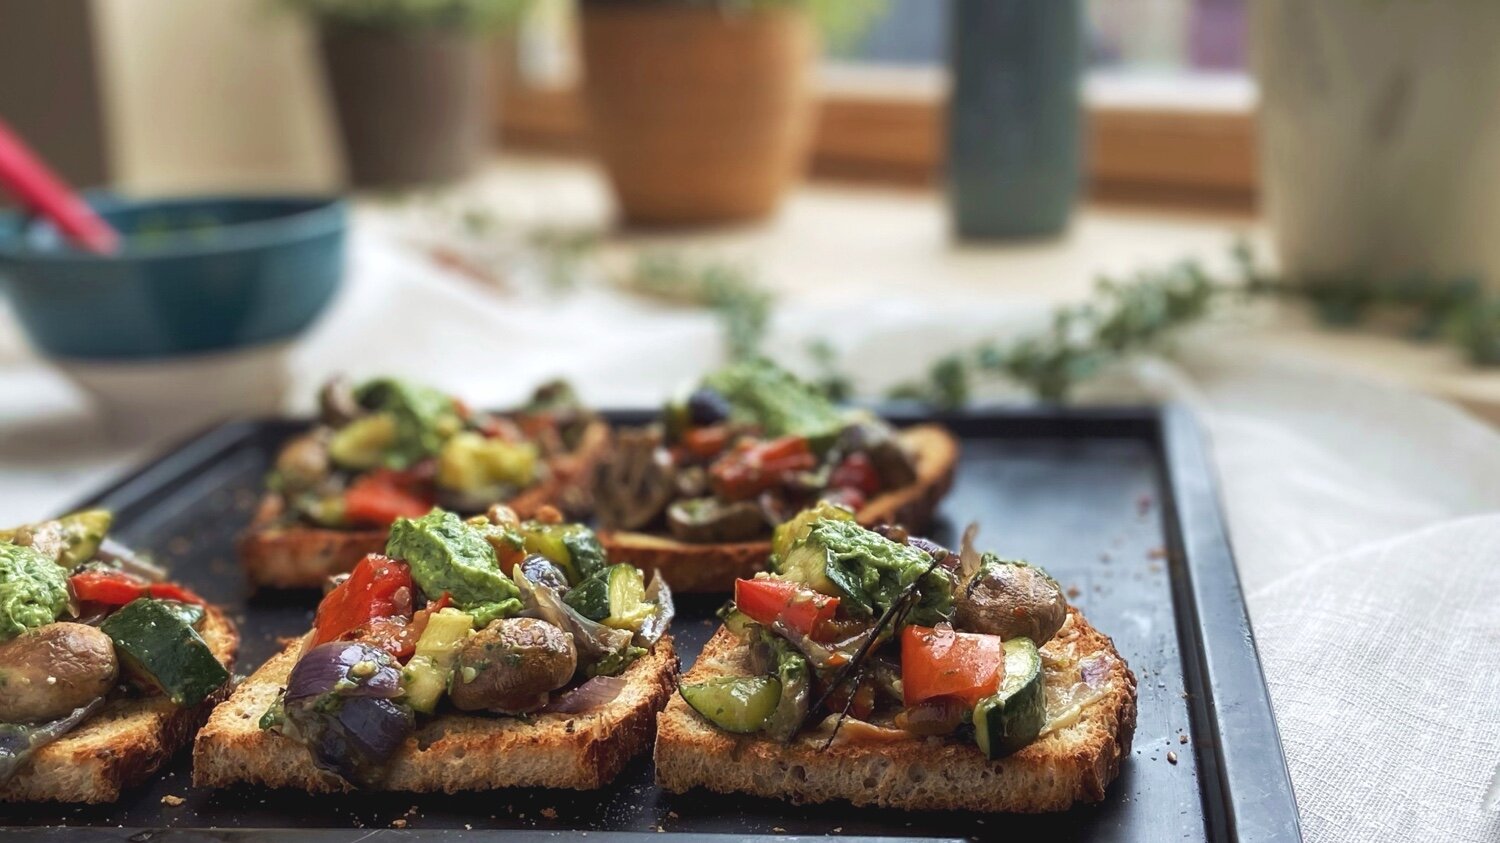 Easy Vegan Recipes for Busy Weekdays: Roasted Vegetable and Vegan Pesto Bruschetta | Brownble